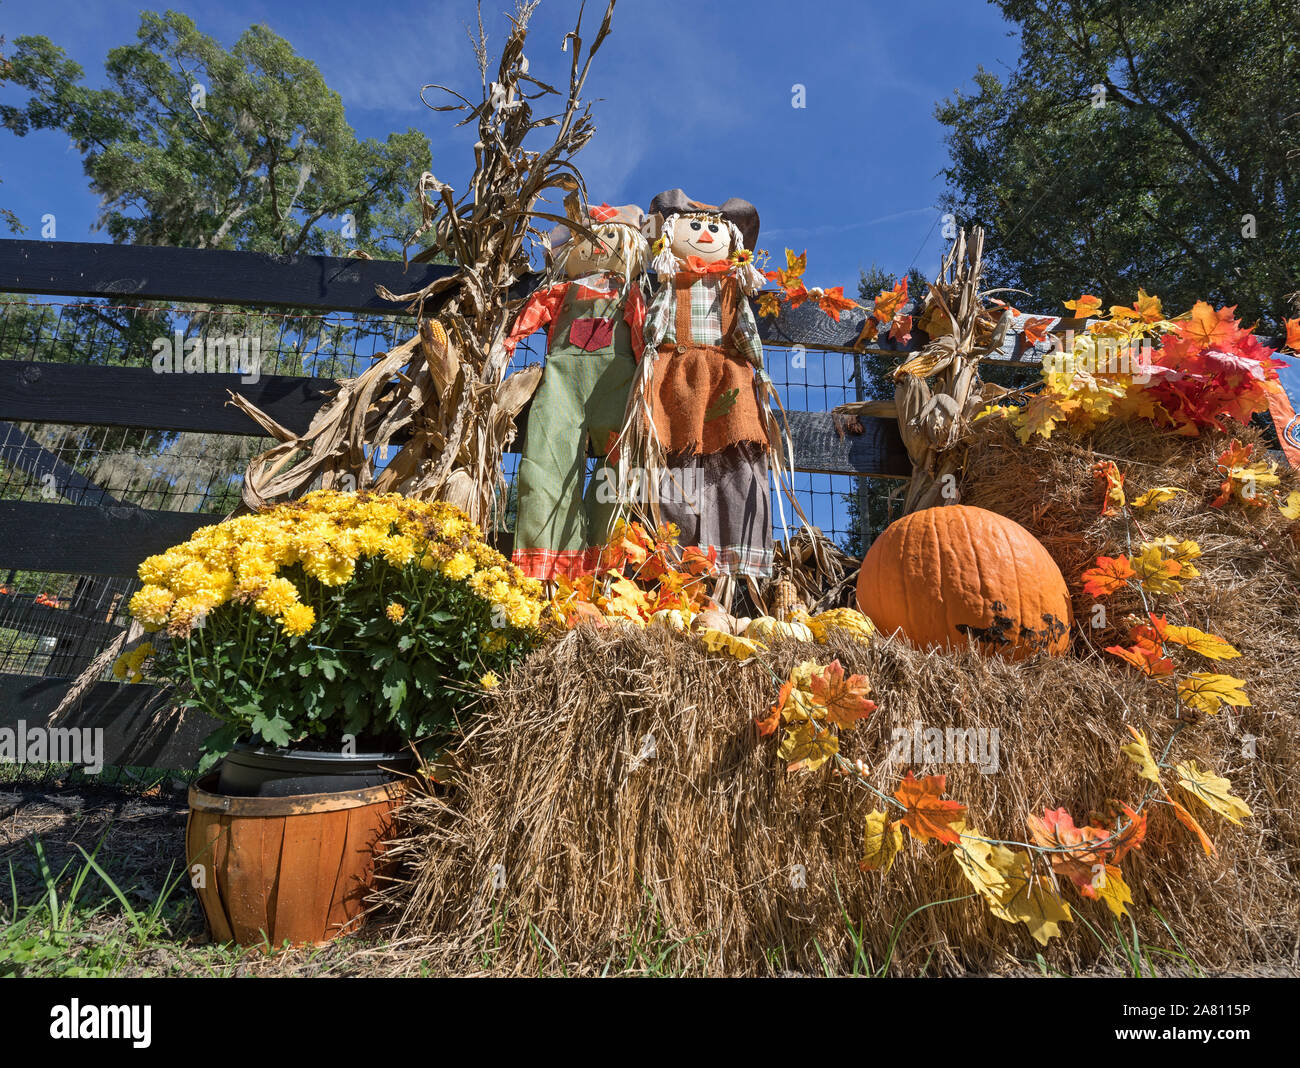 Fall harvest display at a local farm in North Central Florida. Stock Photo